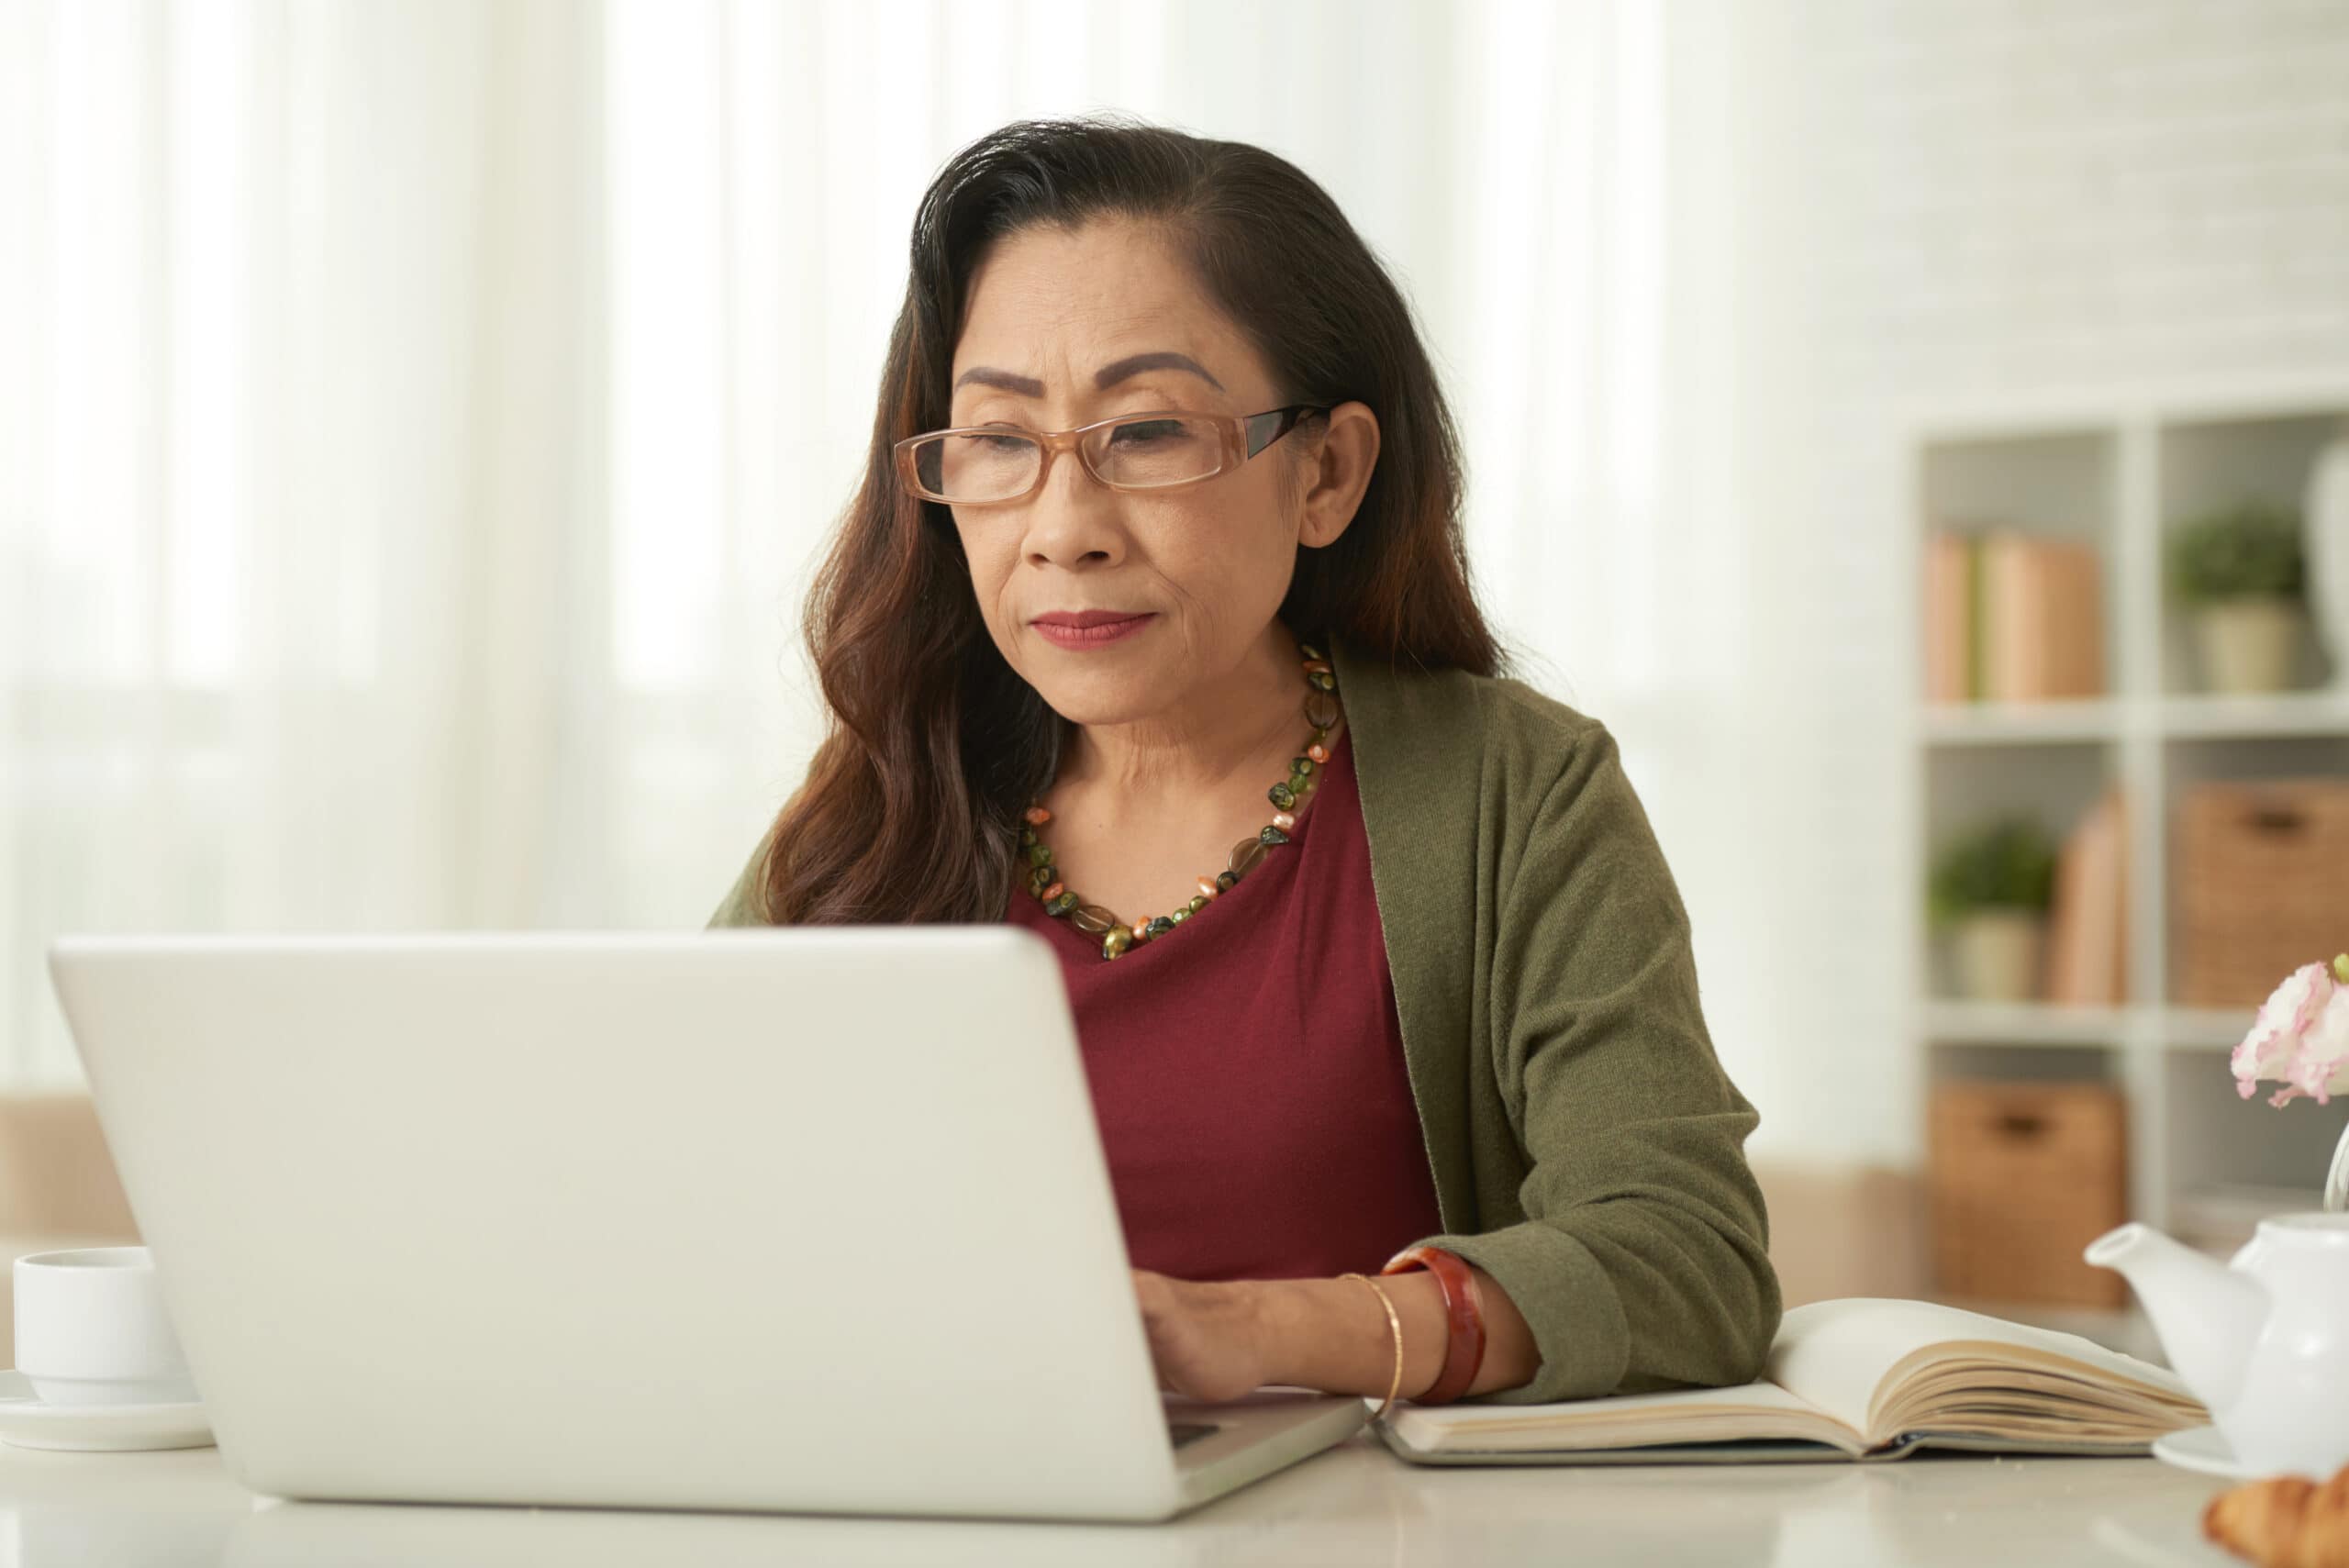 Mature woman wearing glasses using laptop at the table at home.